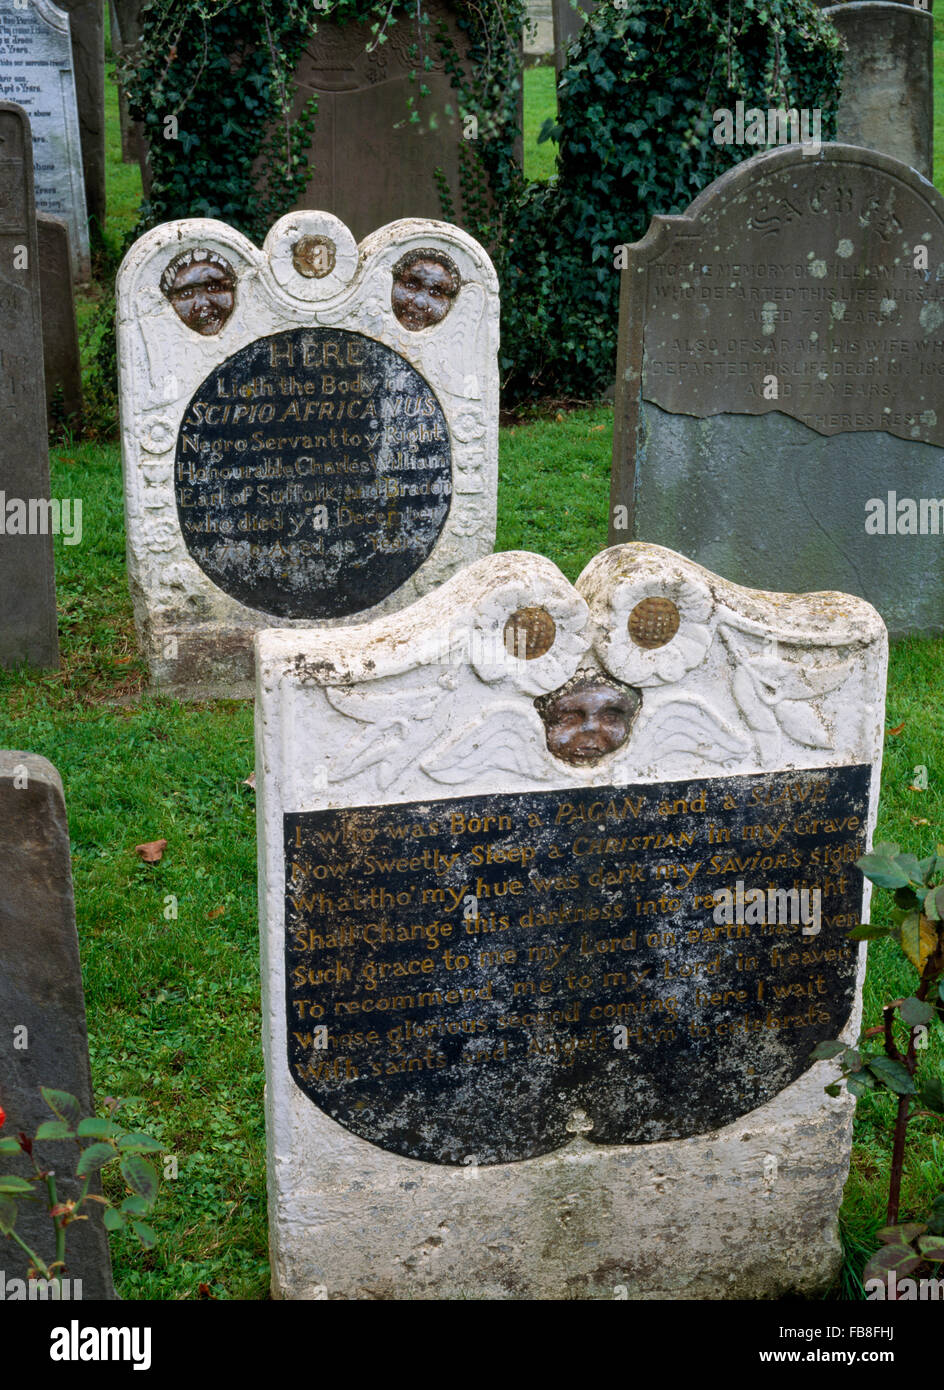 Grave of an African slave Scipio Africanus in St Mary's churchyard, Henbury,  Bristol, England. Died aged 18 in 1720 Stock Photo - Alamy